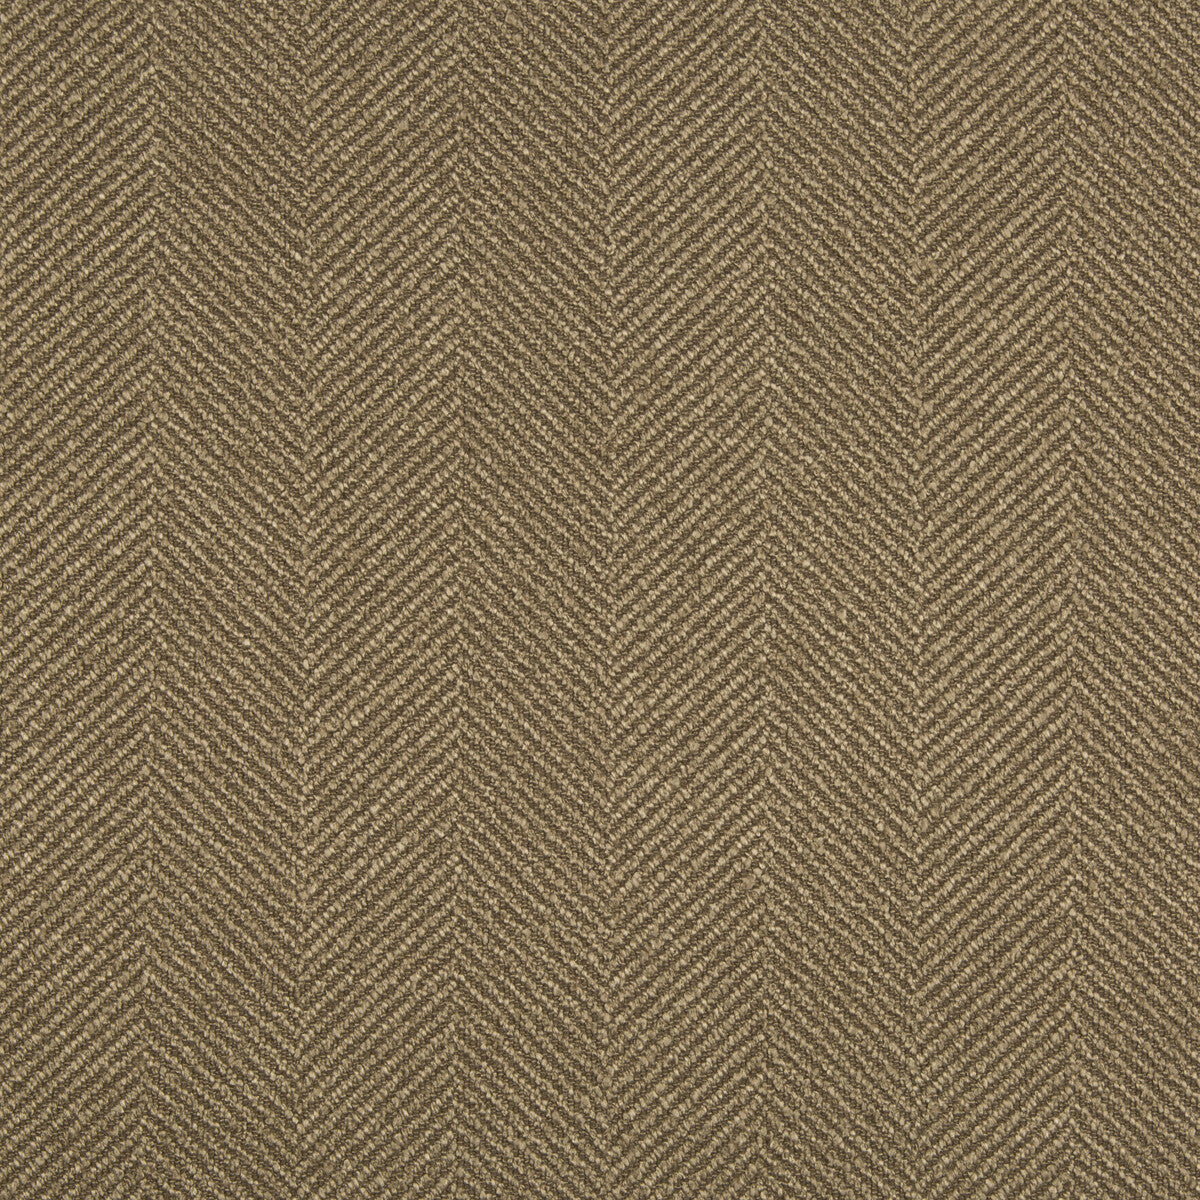 Kravet Smart fabric in 34631-6 color - pattern 34631.6.0 - by Kravet Smart in the Performance Crypton Home collection